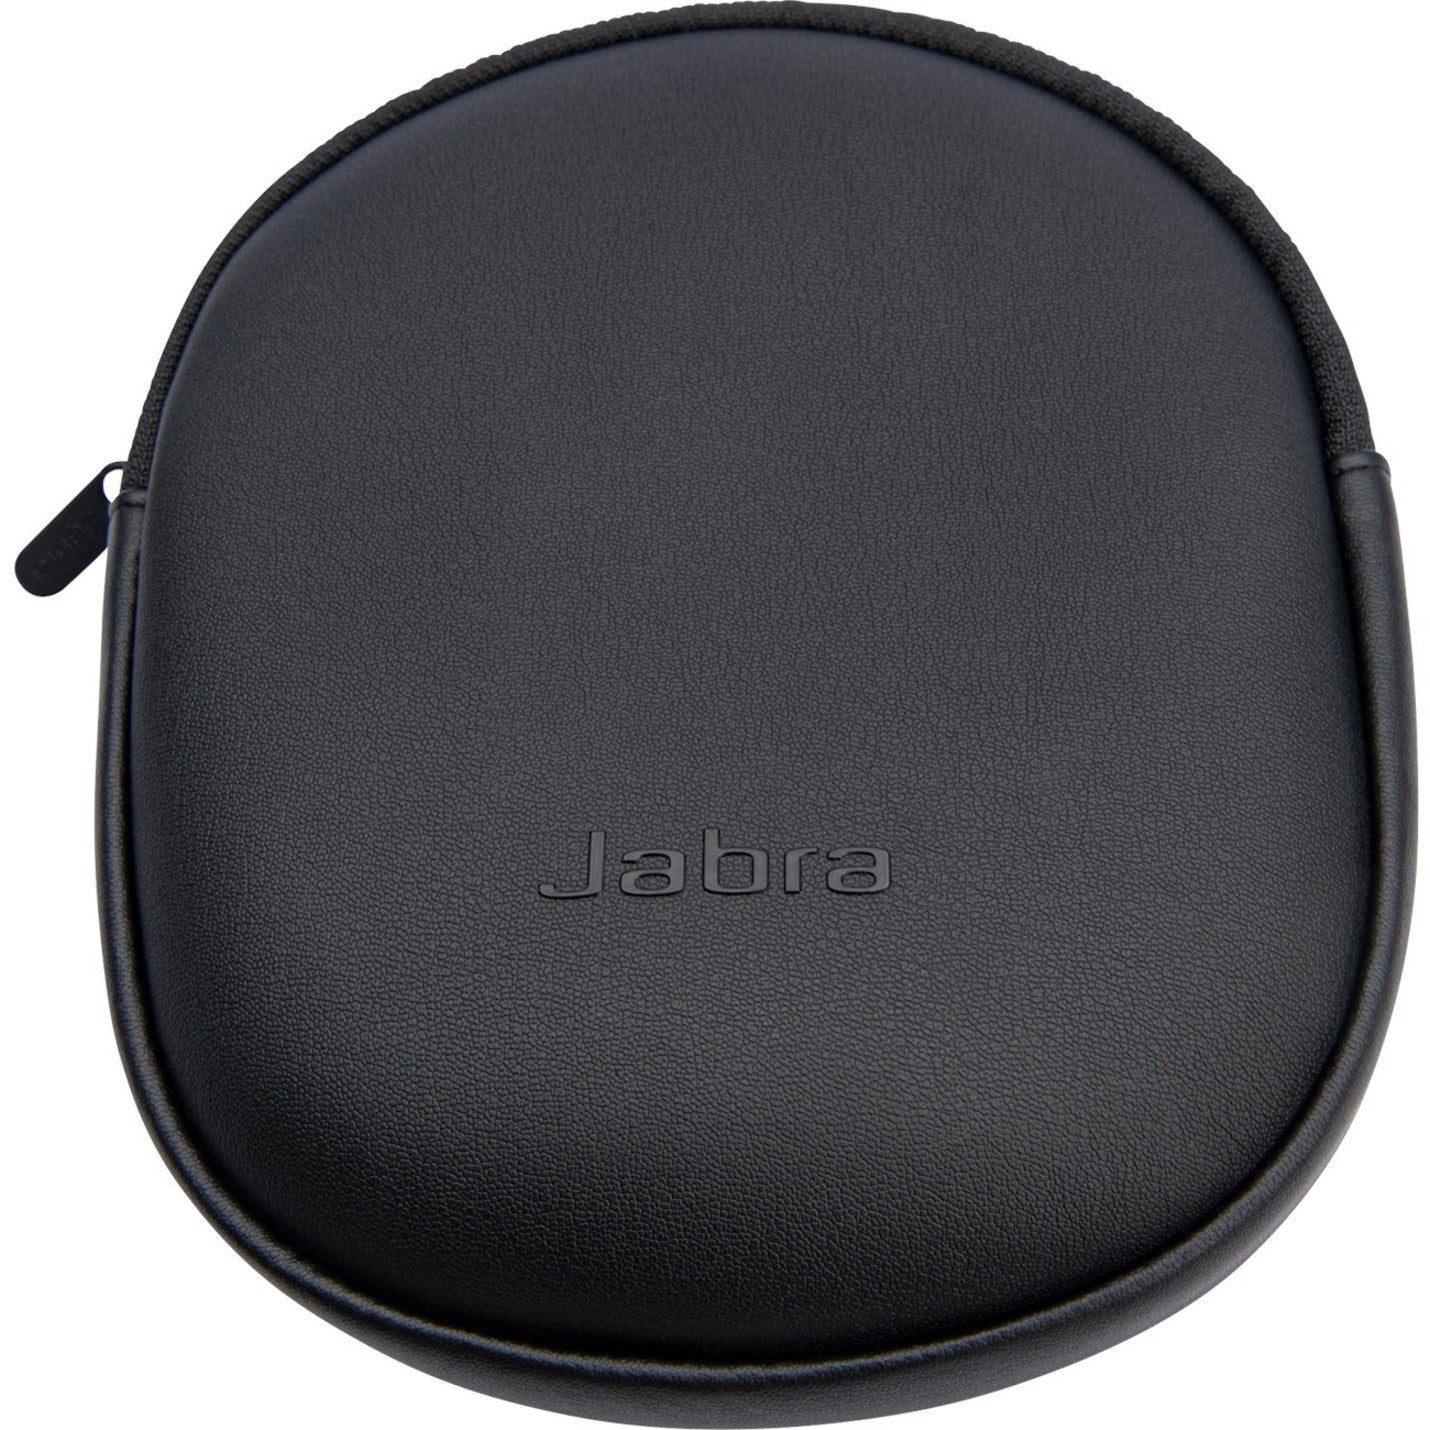 Jabra Carrying Case (Pouch) Headset - 10 Pack (14101-47) – Network